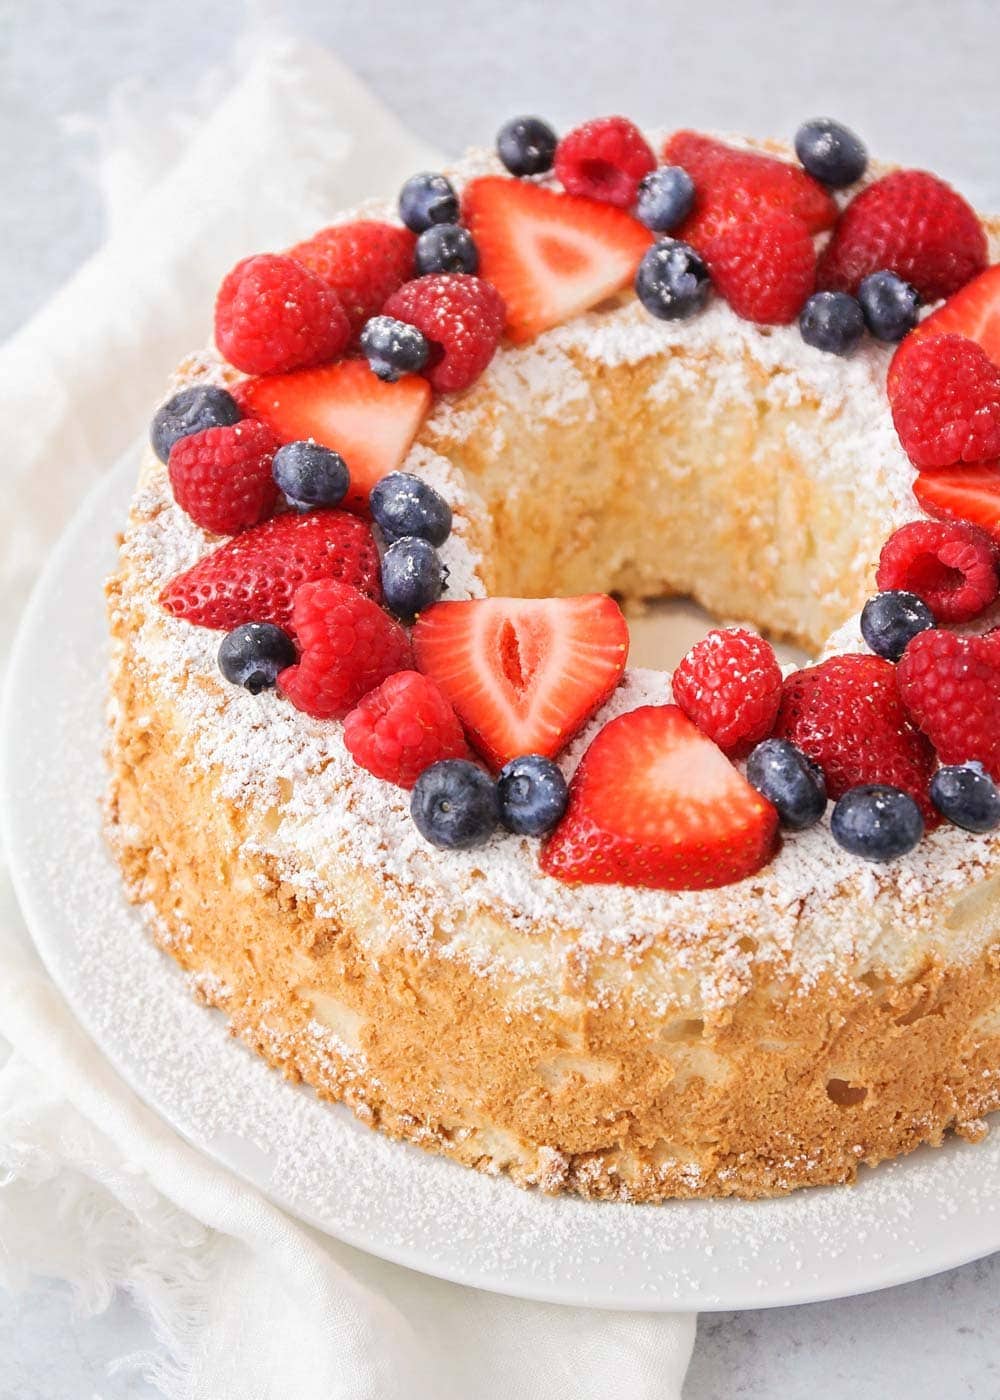 Homemade Angel food cake recipe topped with powder sugar and fresh berries.